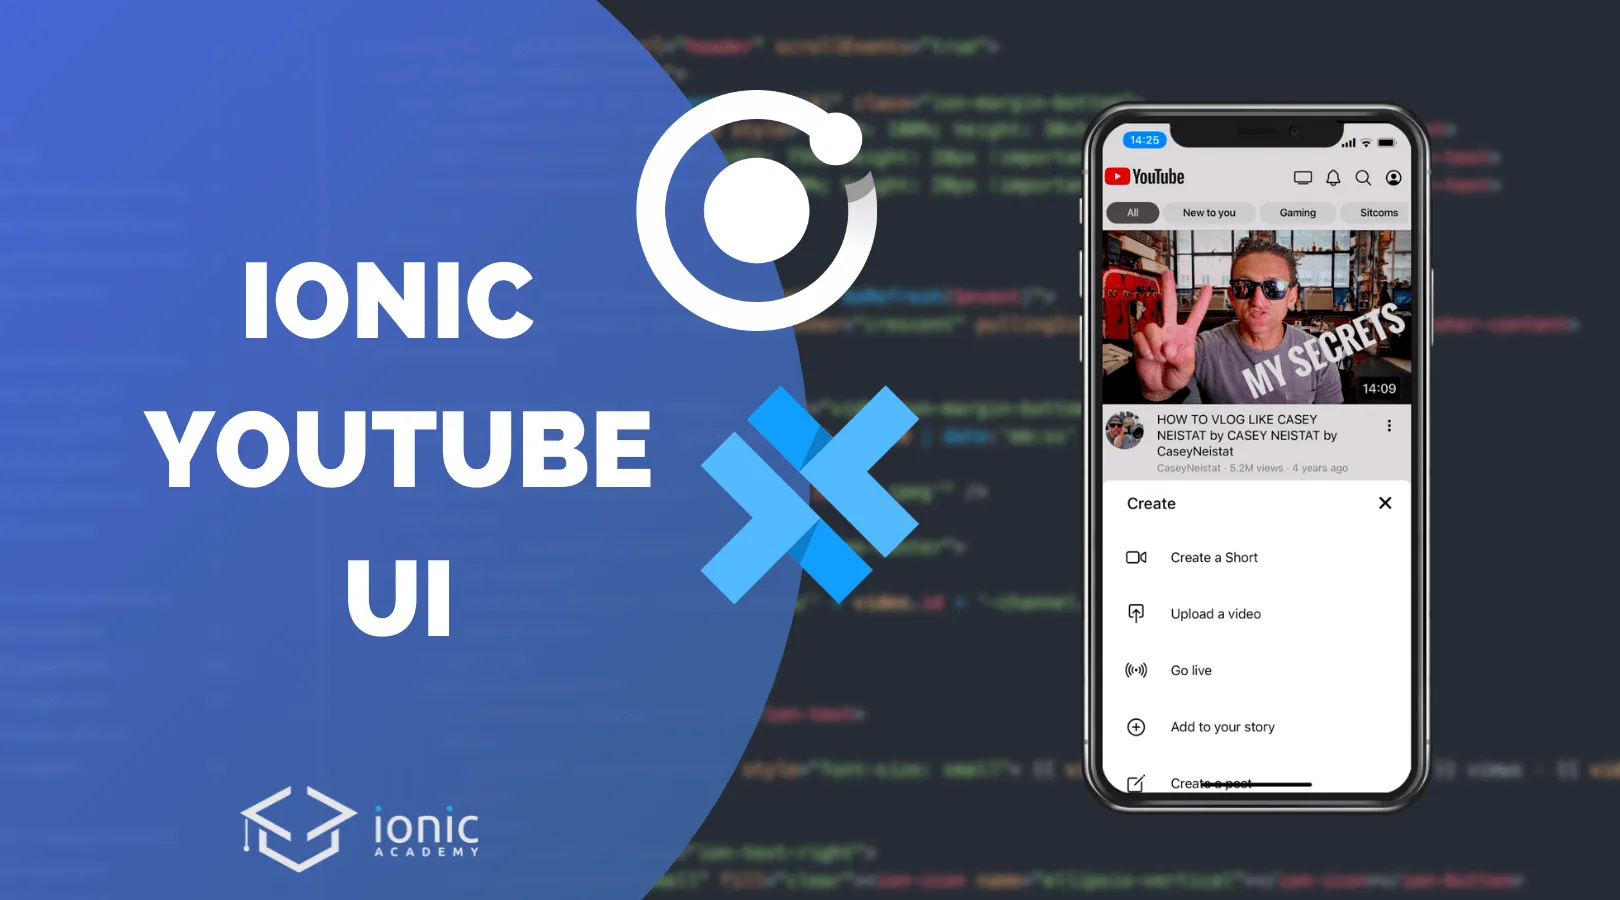 Building the YouTube UI with Ionic